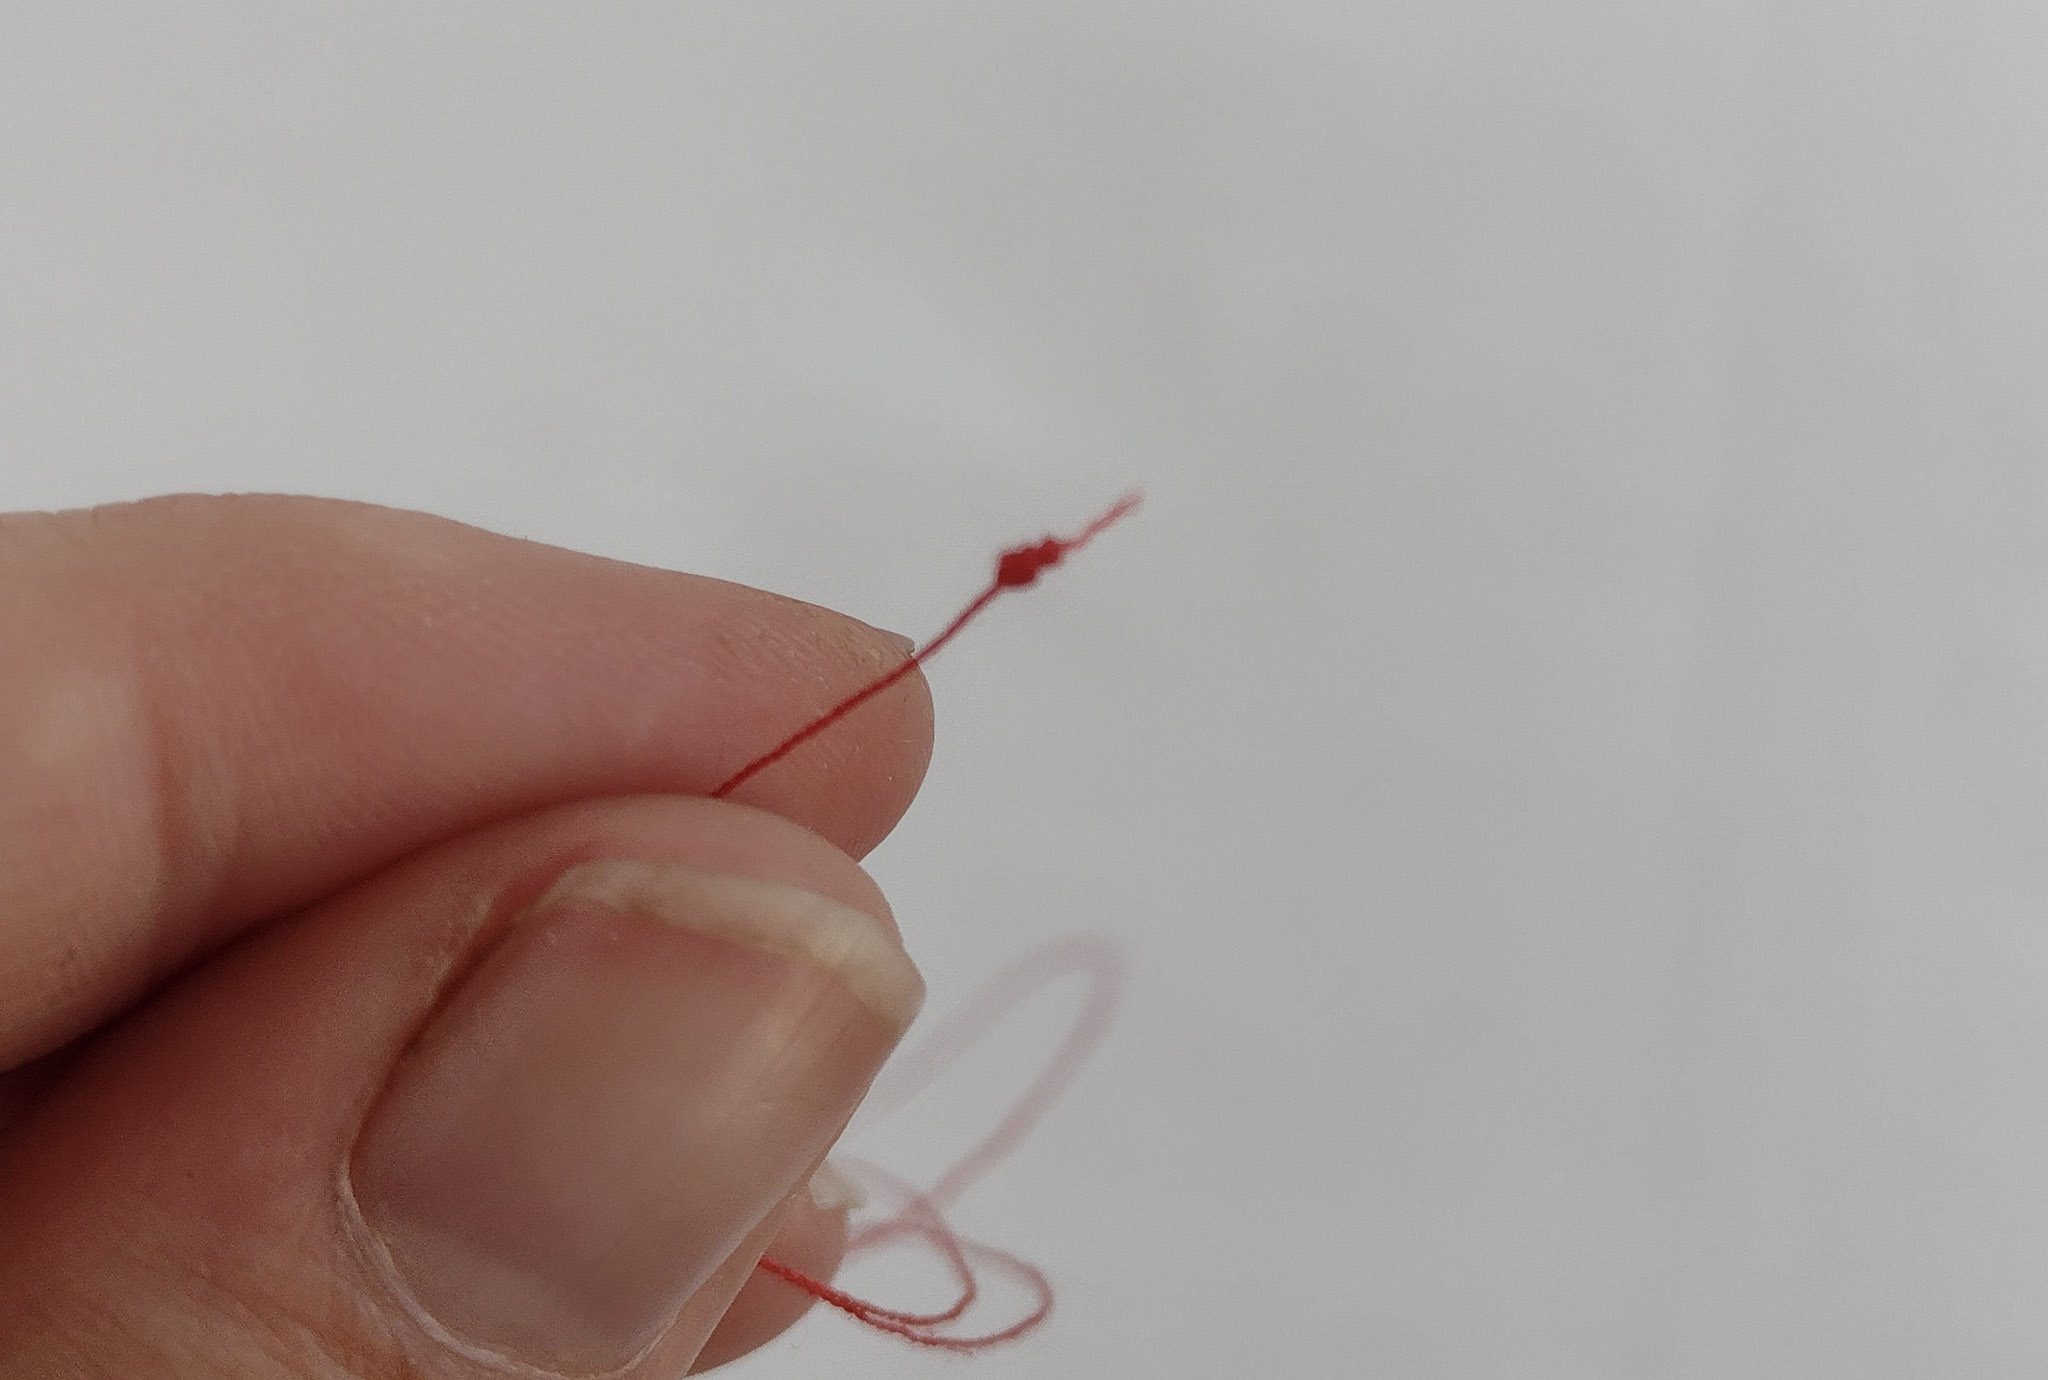 wrapping red thread around a needle to make a knot